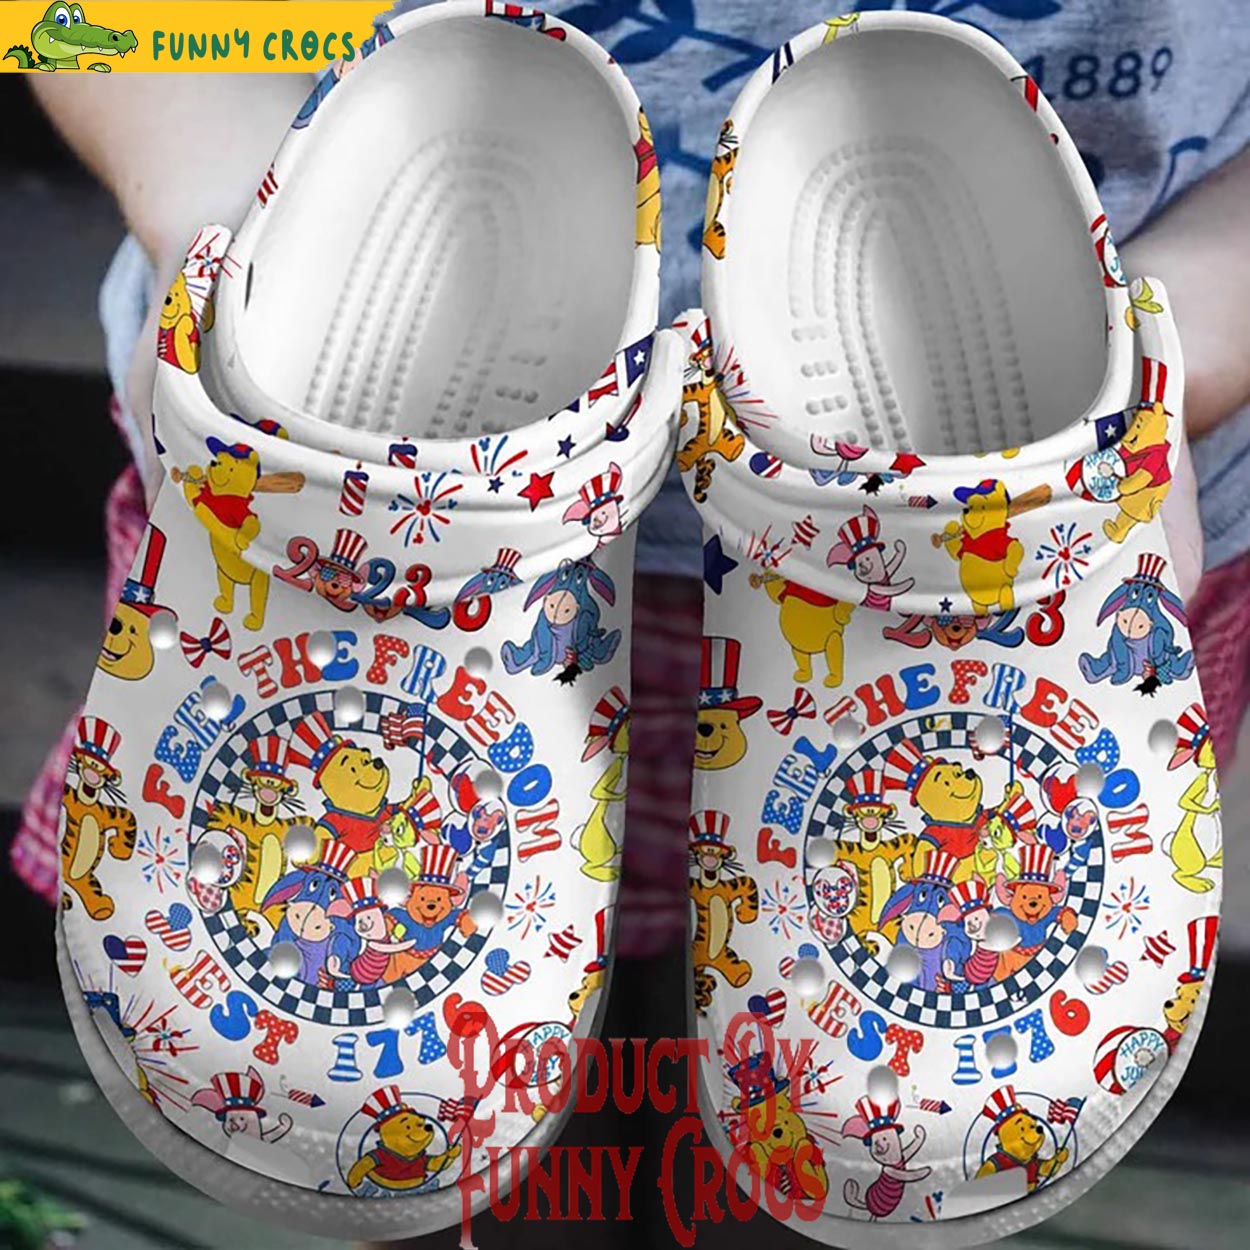 Winnie The Pooh Feel The Freedom Crocs Shoes - Discover Comfort And ...